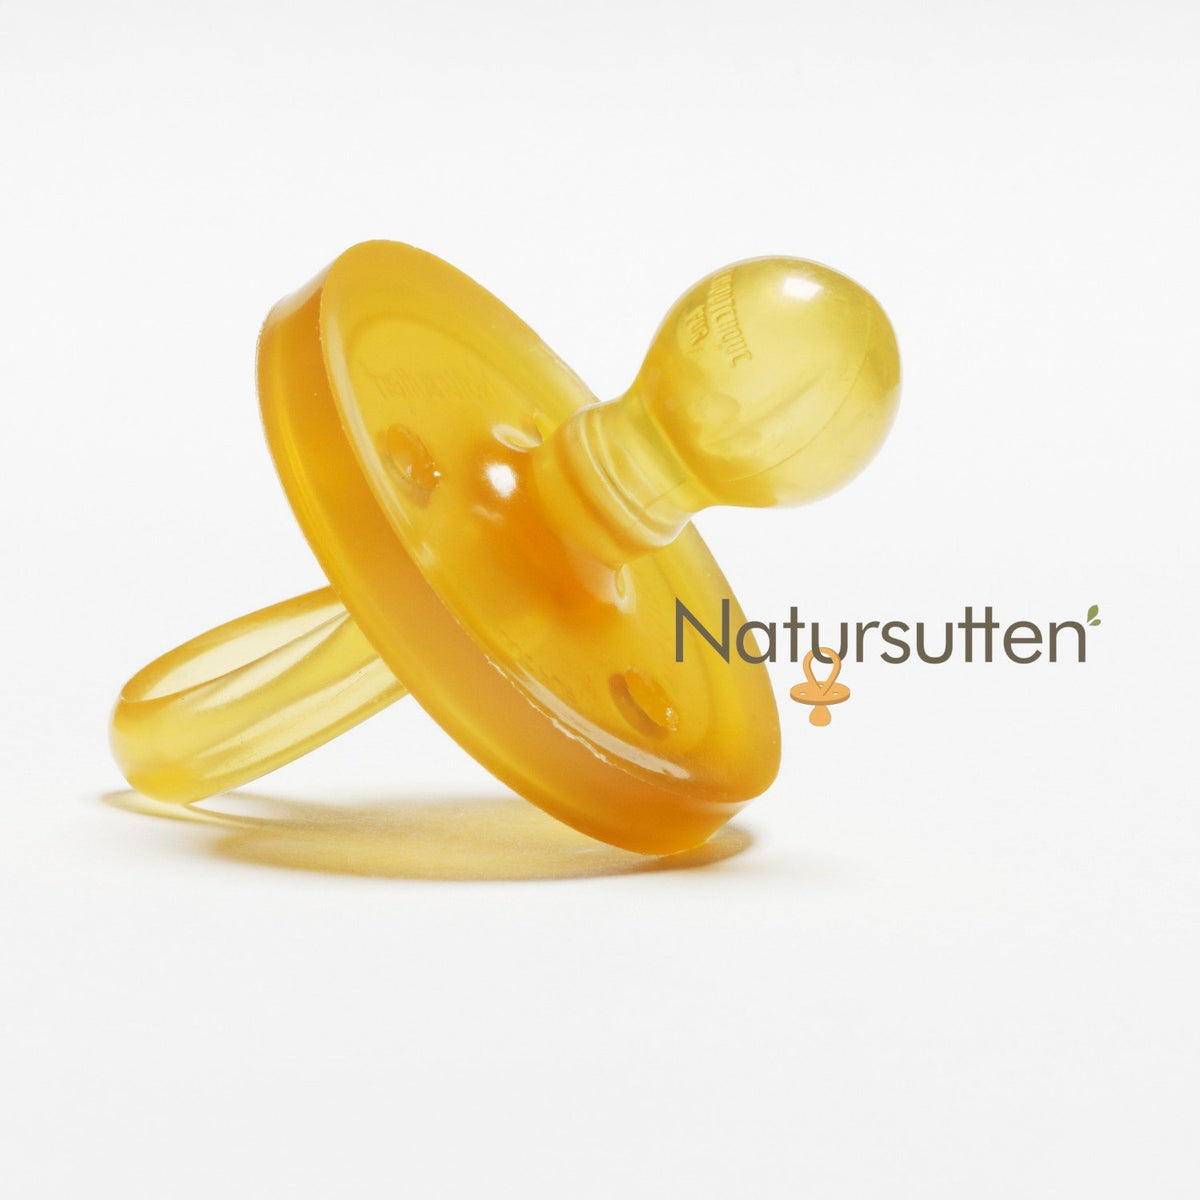 Natursutten Pacifiers 6-12 Months - 1-Pack Original Shield Orthodontic  Nipple Natural Rubber Safe & Soft BPA-Free Pacifiers for Breastfeeding  Babies - Newborn Pacifiers Made in Italy